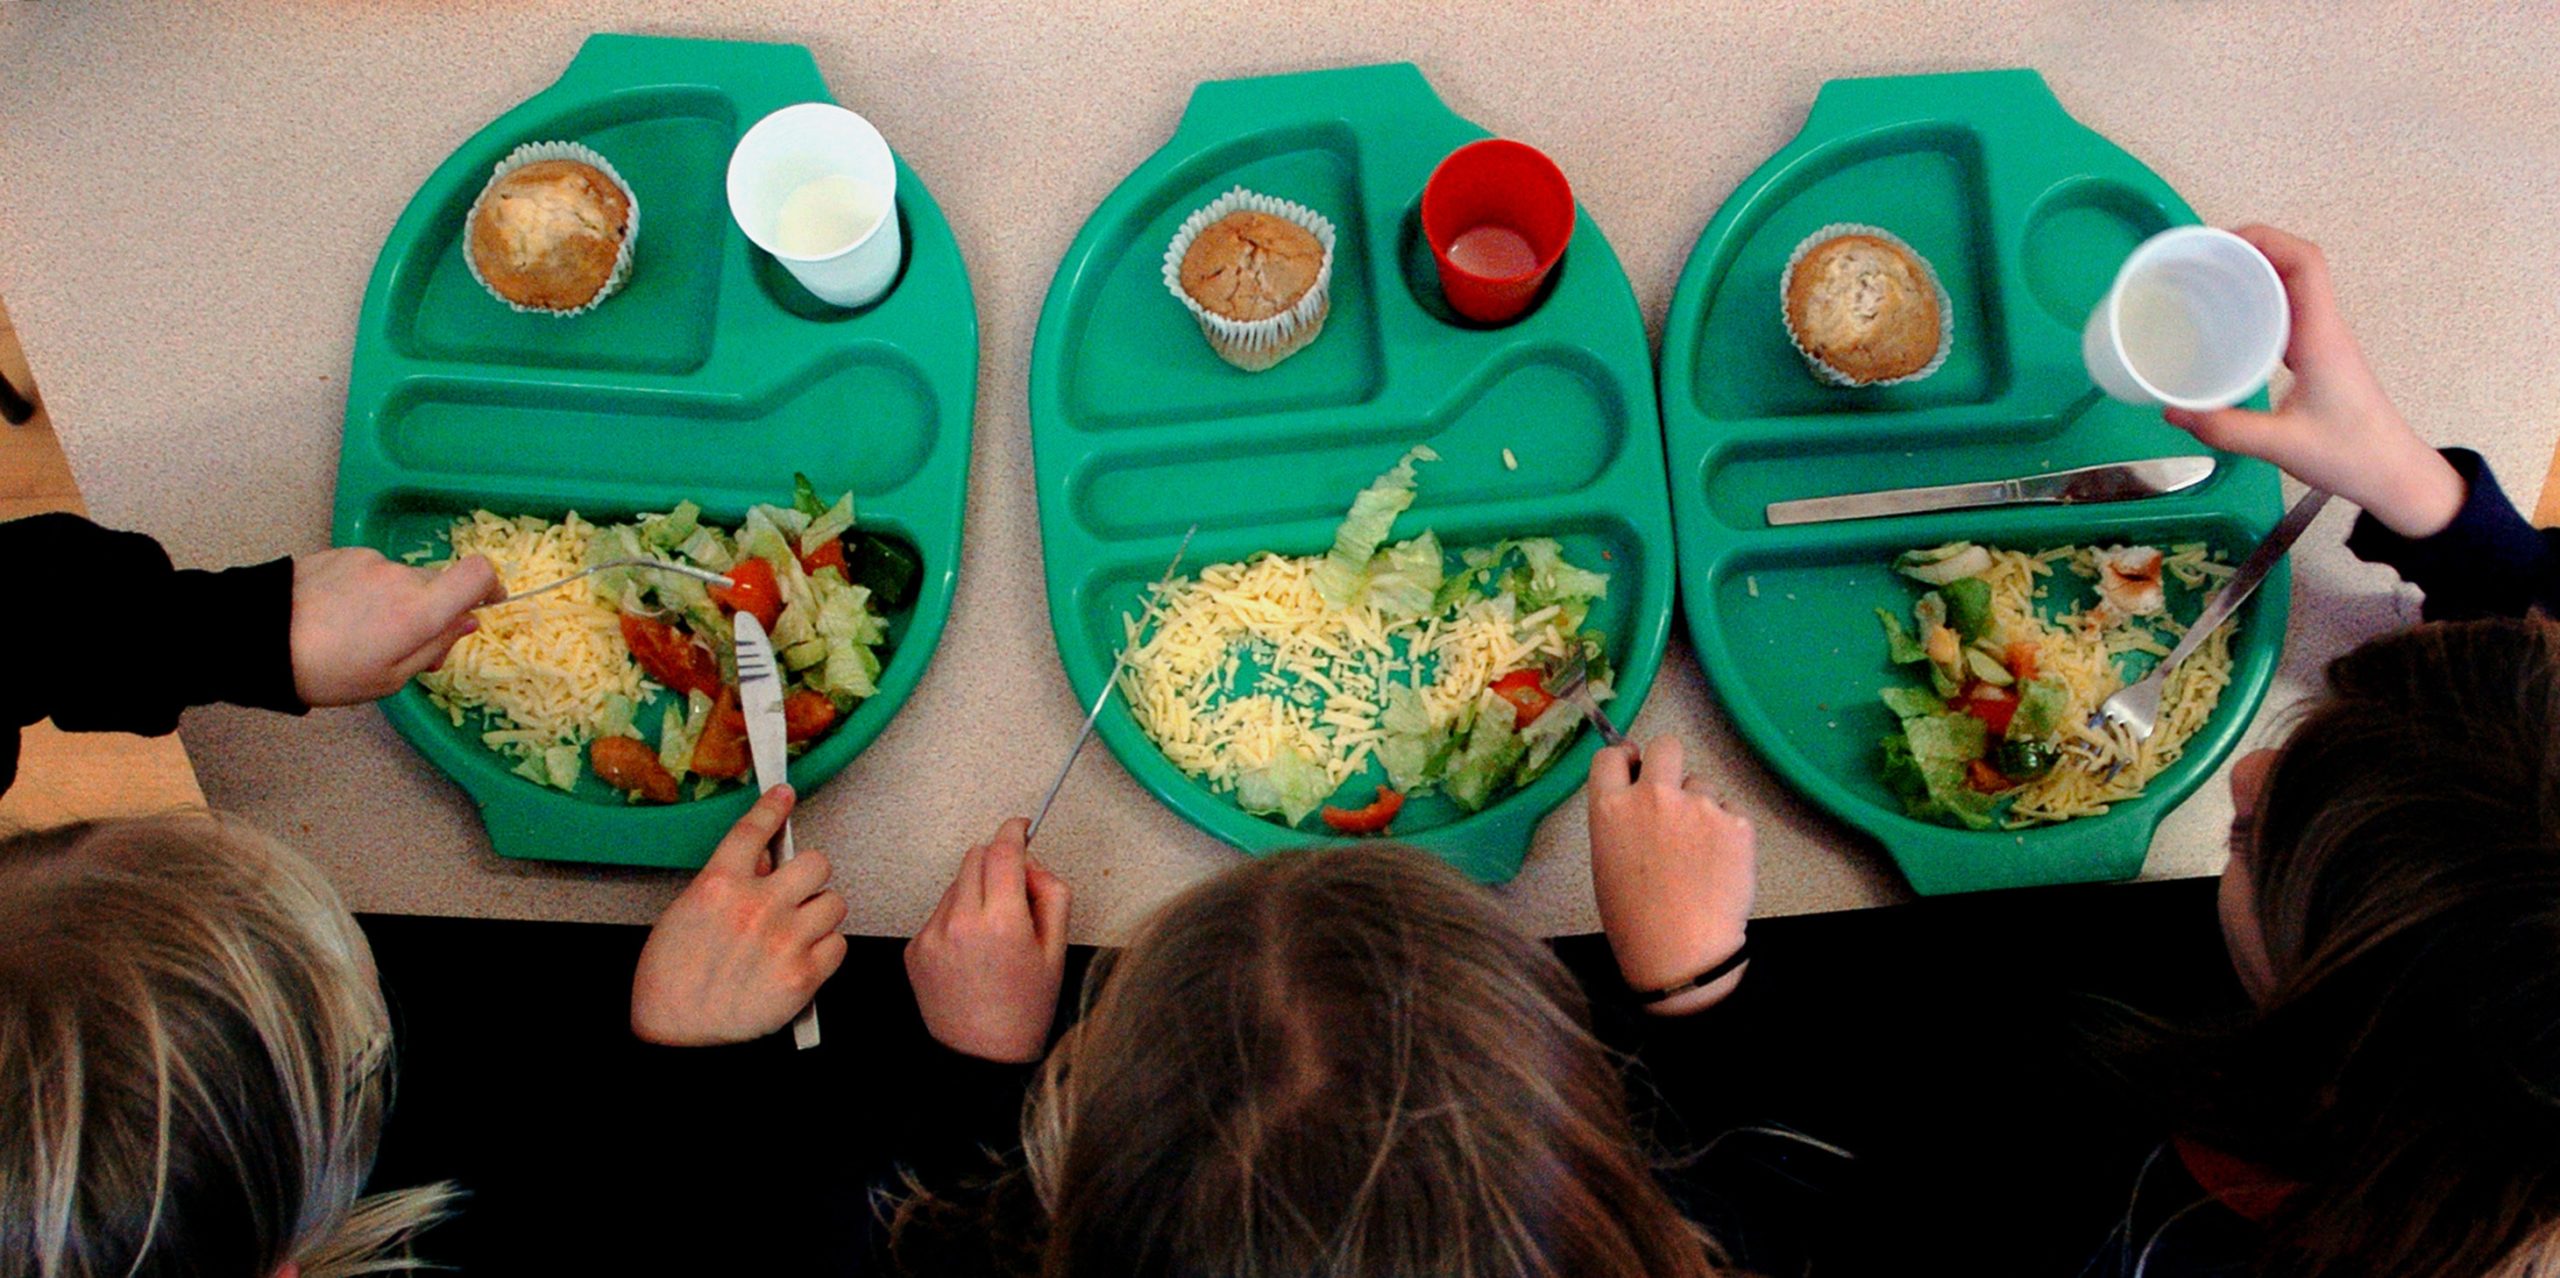 Chicken and Beef off the menu: School dinners hit by rising food costs